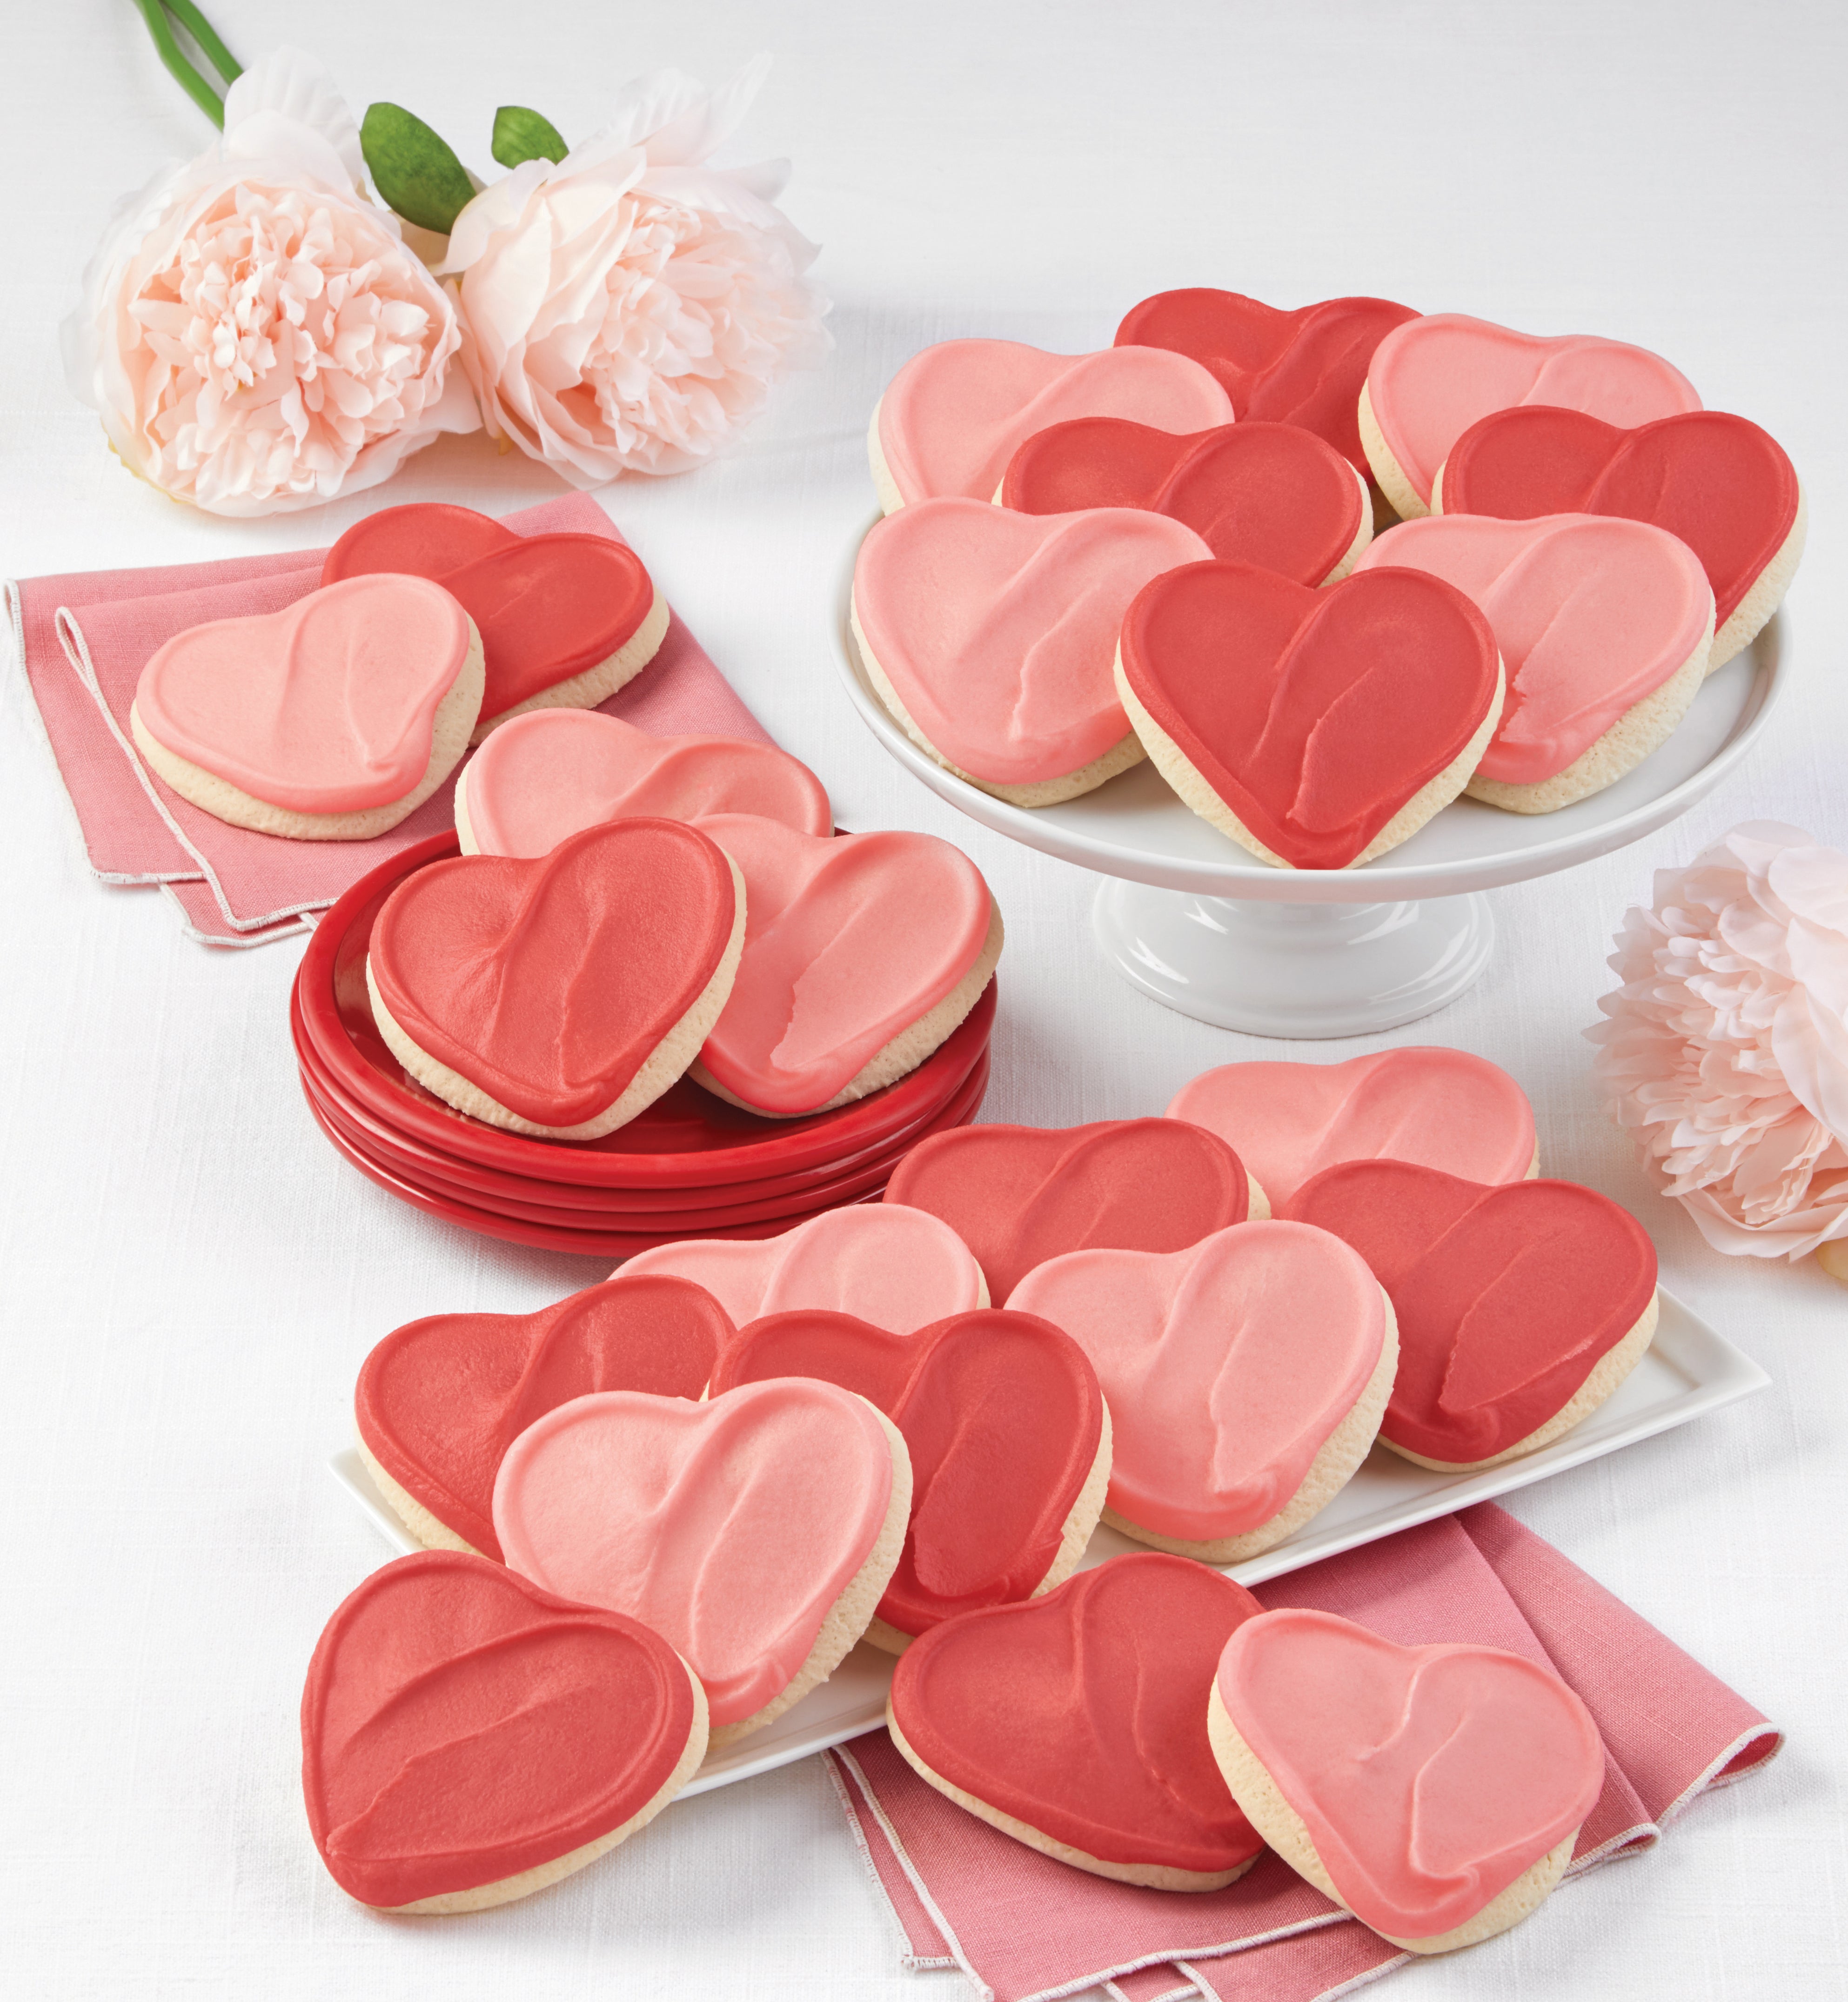 Cheryl's Frosted Heart Cut Out Cookies